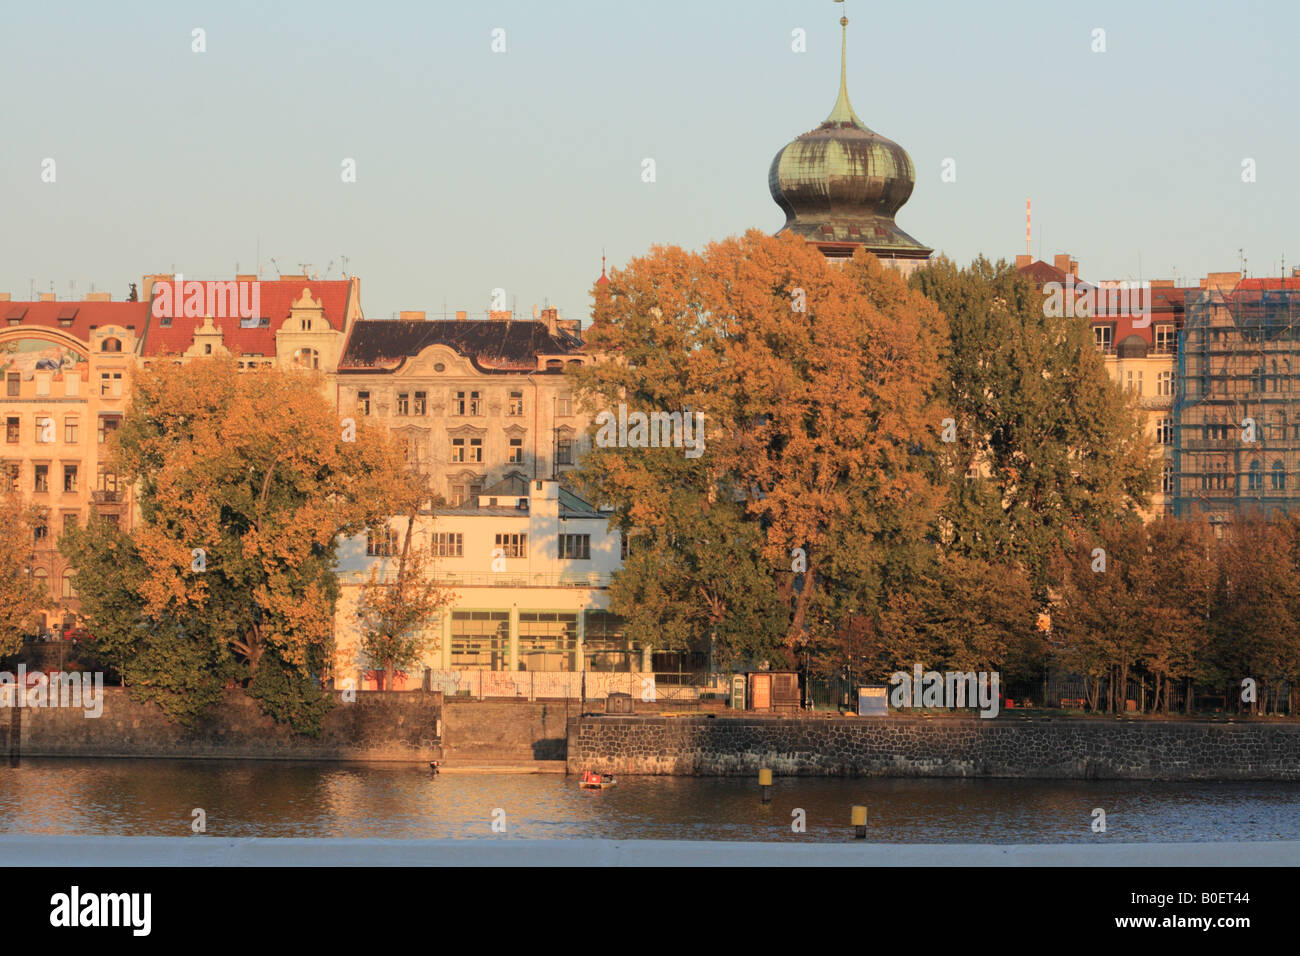 Boaters swarm in the water beneath Manes on a lovely golden October evening in Prague Stock Photo